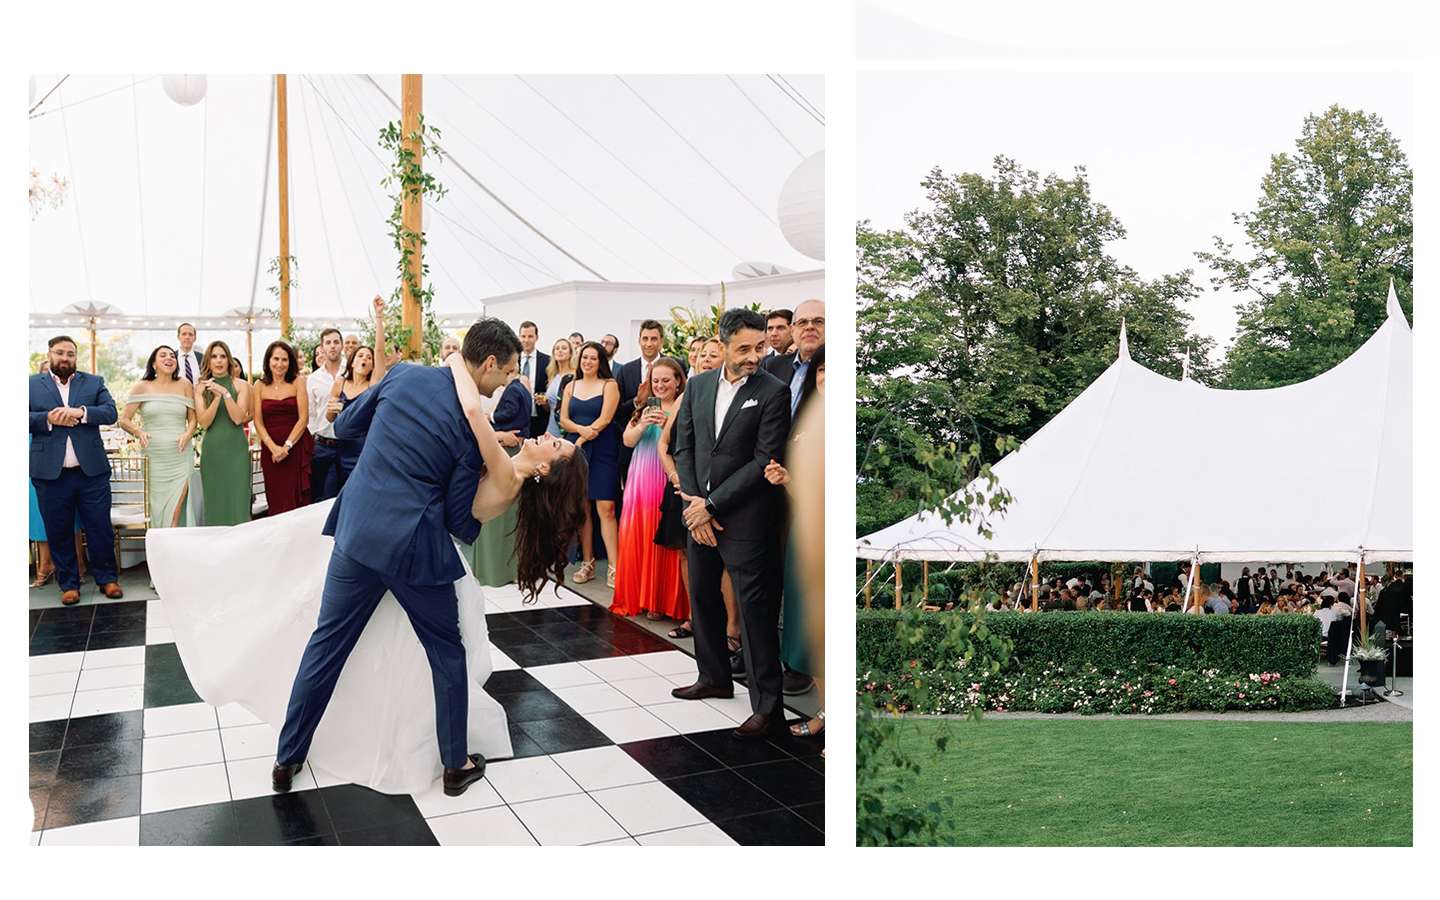 Sailcloth Luxury wedding in the Fingerlakes